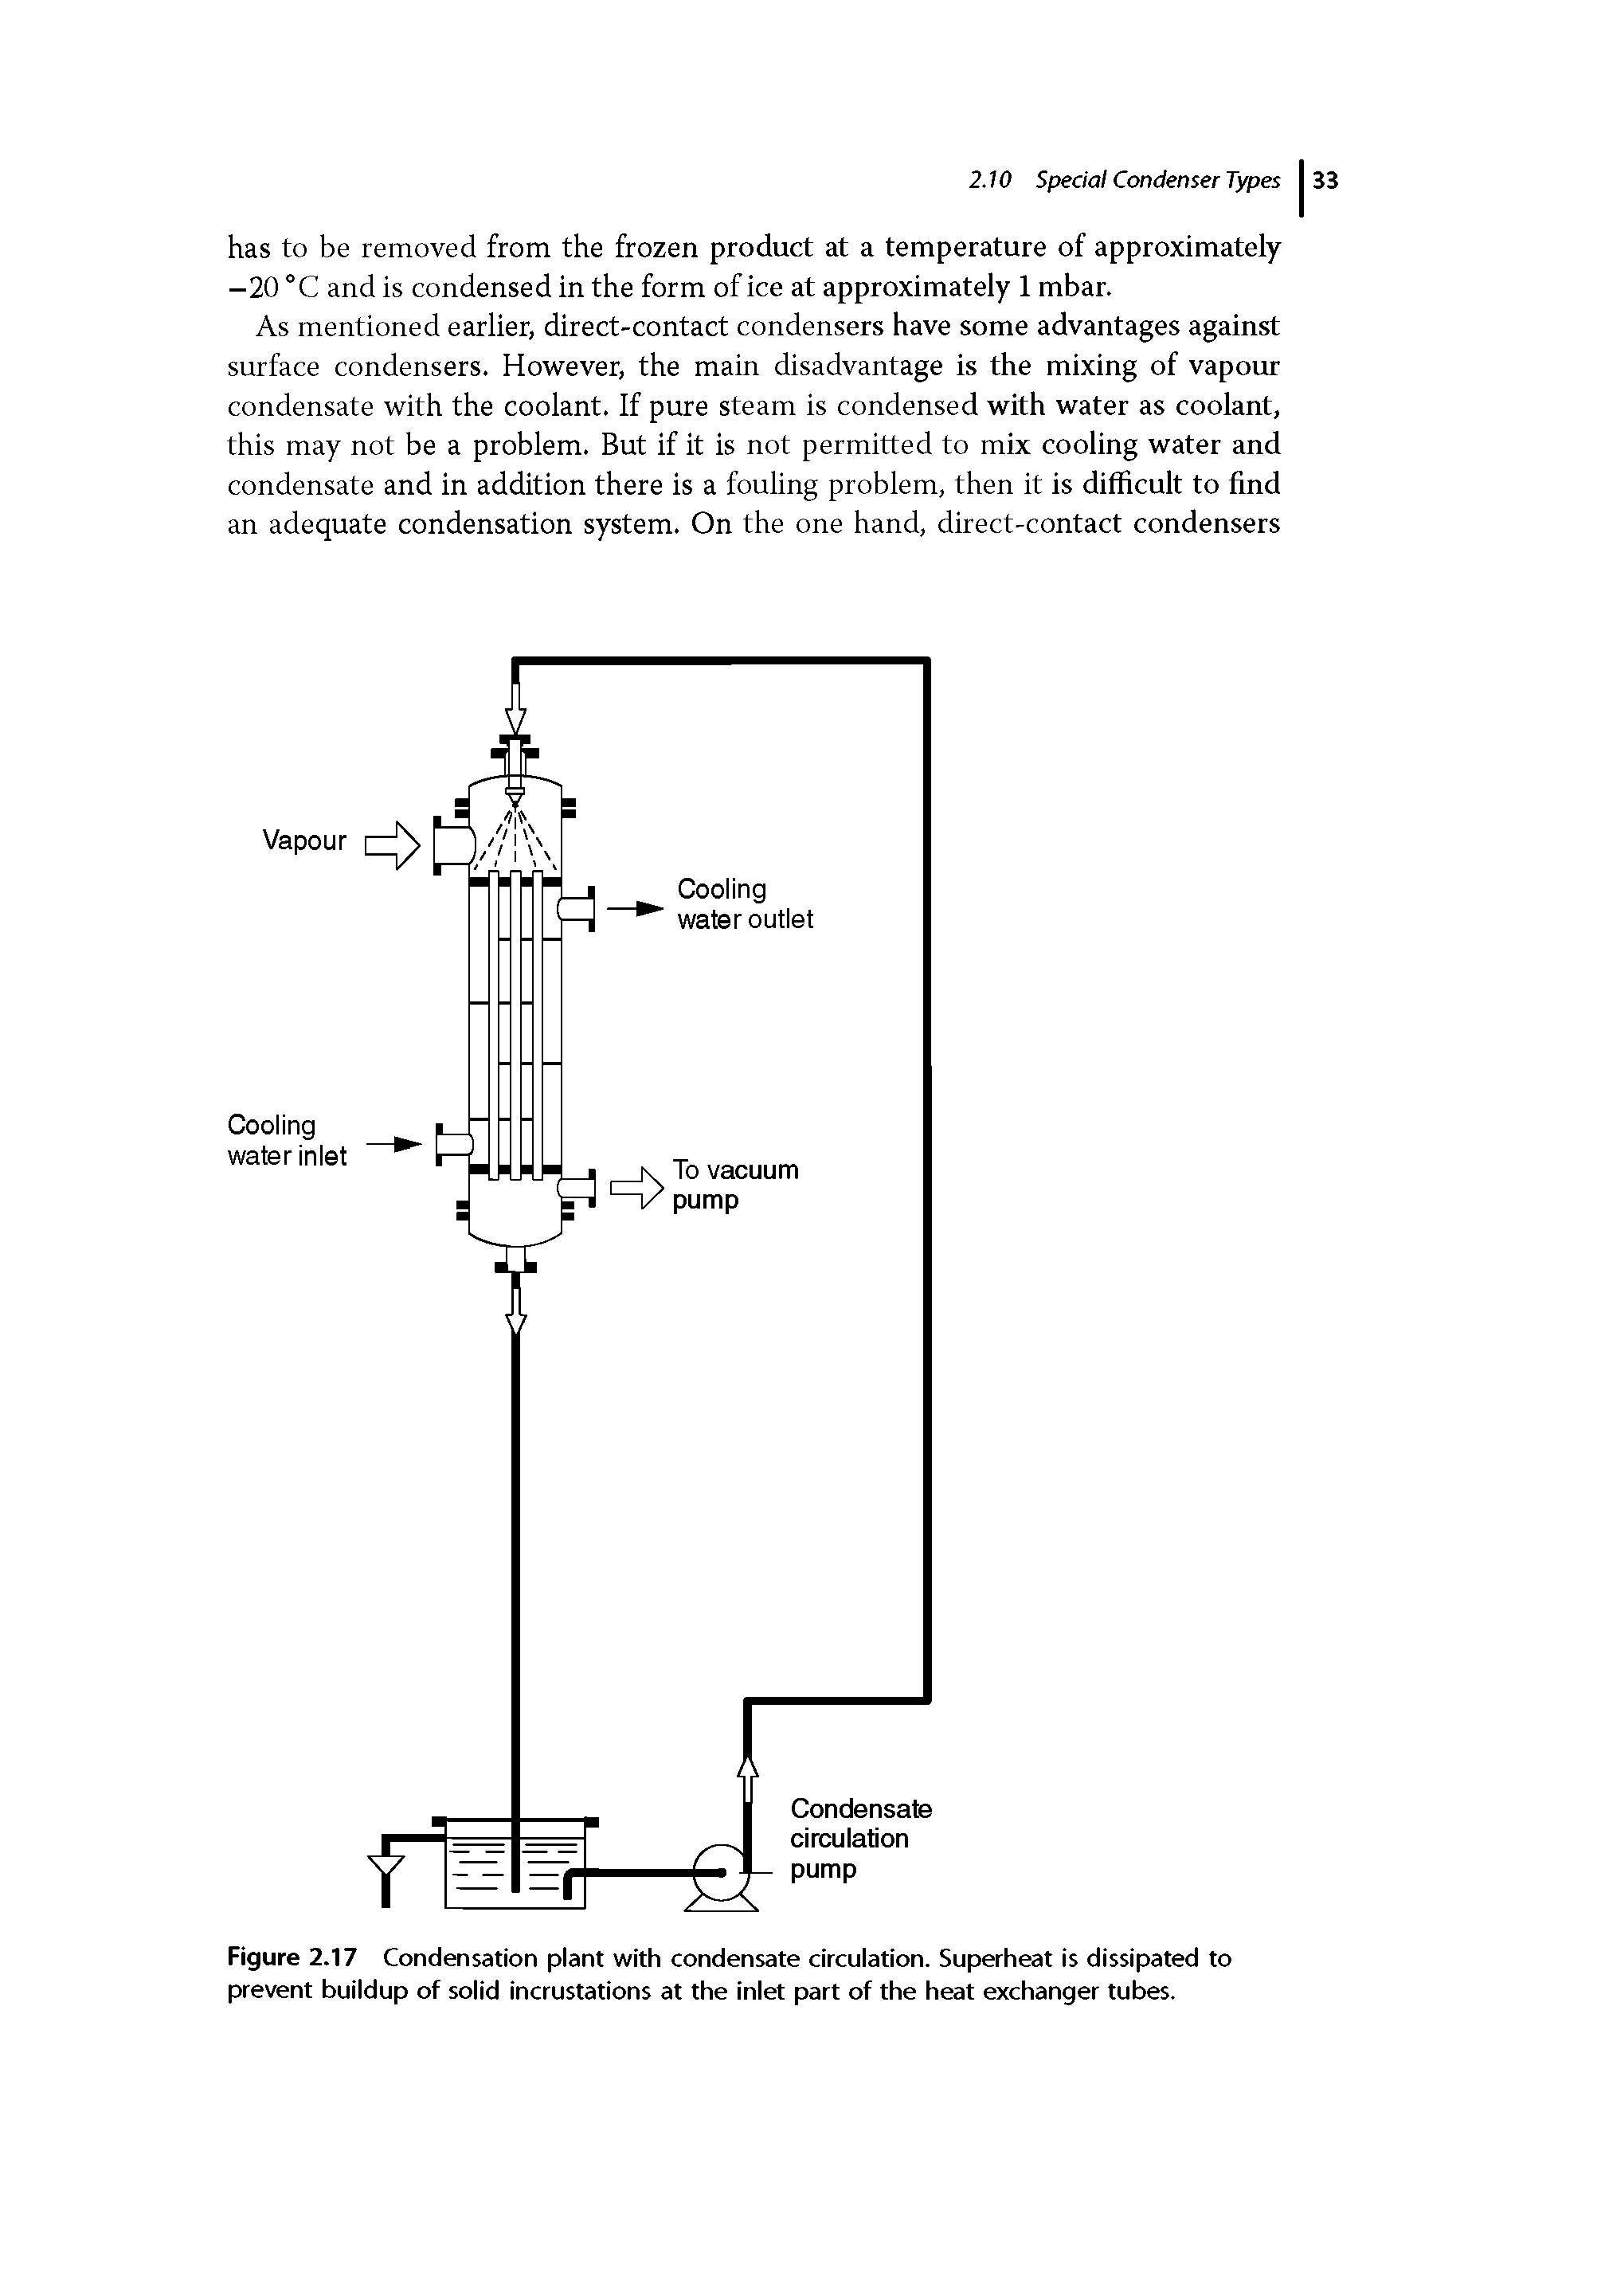 Figure 2.17 Condensation plant with condensate circulation. Superheat is dissipated to prevent buildup of solid incrustations at the inlet part of the heat exchanger tubes.